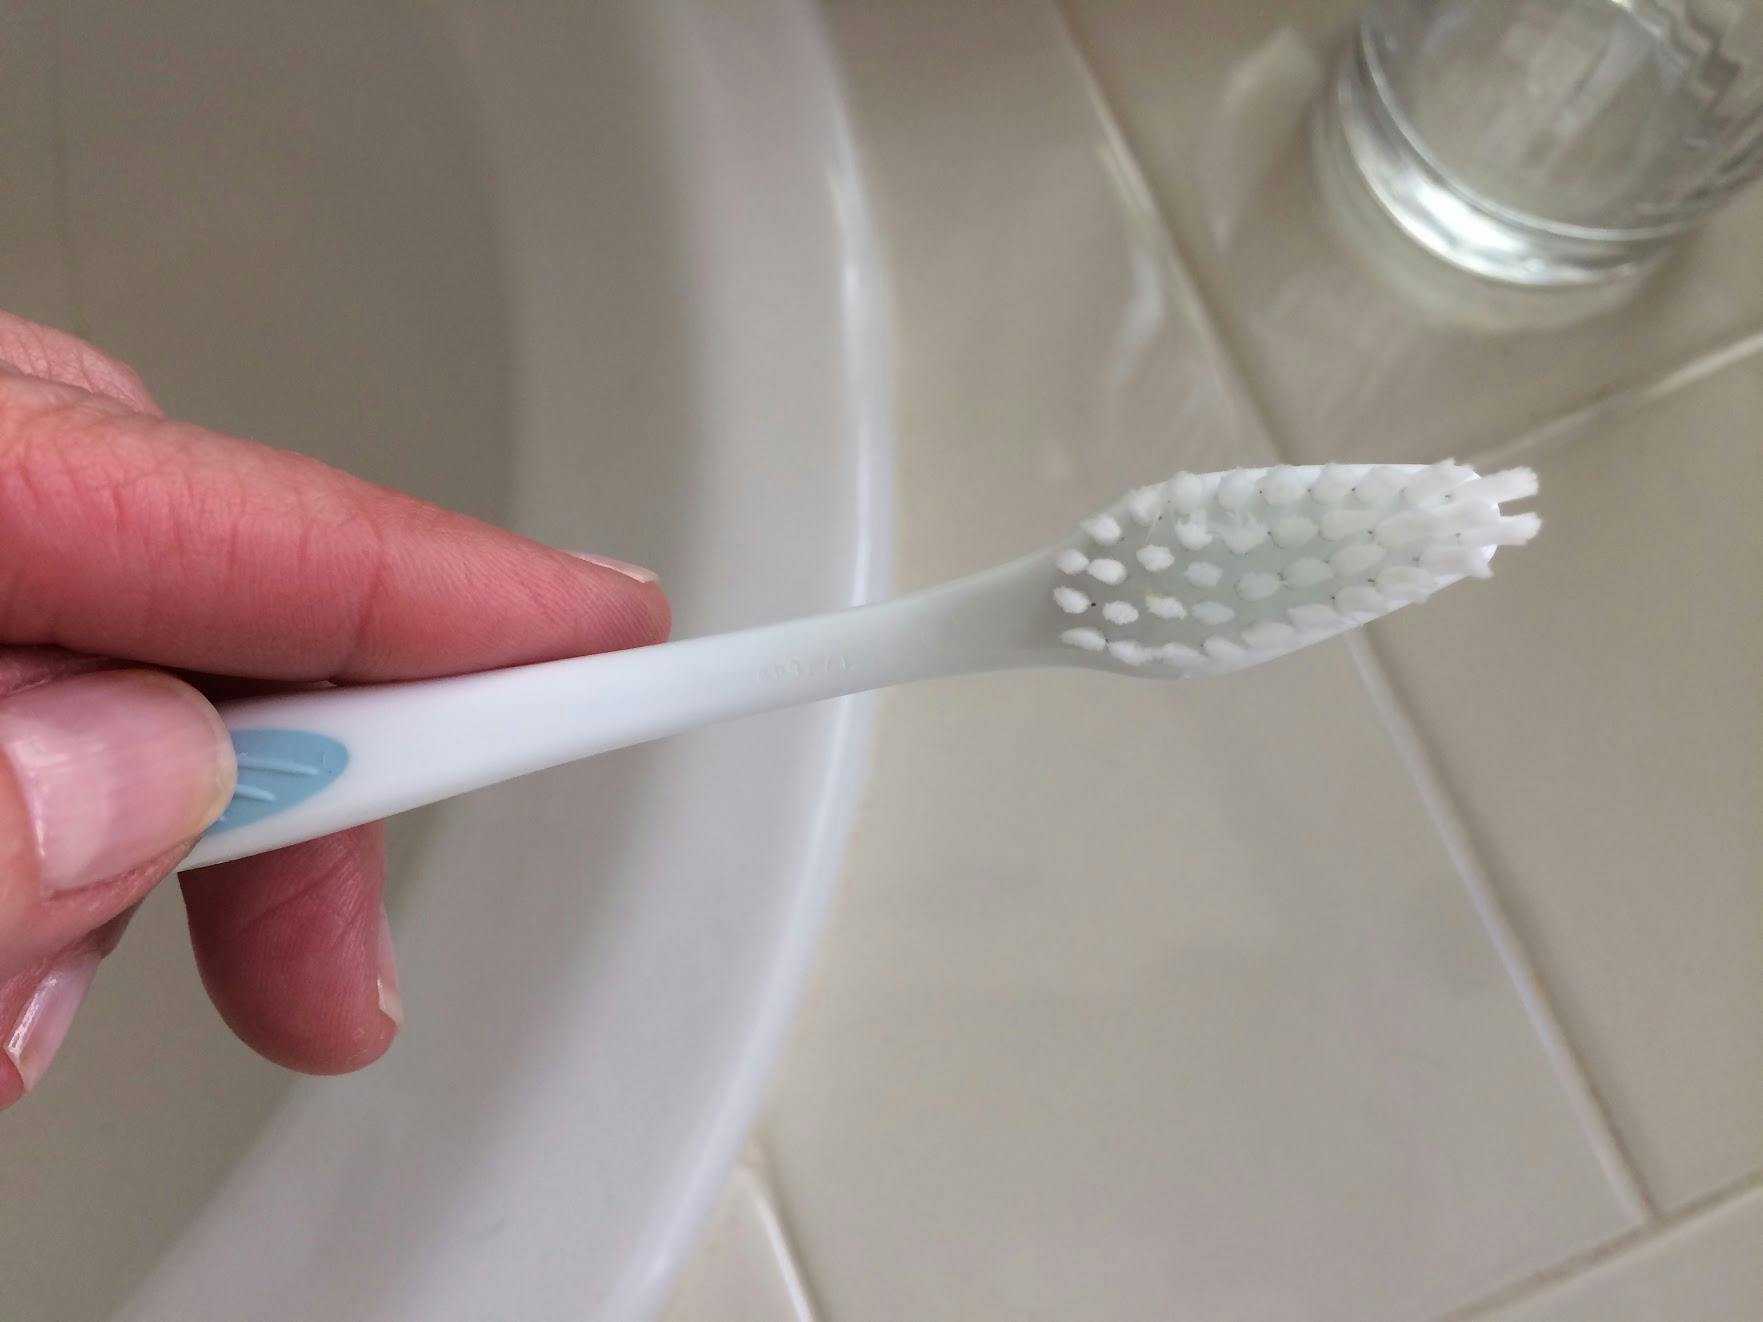 are quips good toothbrushes